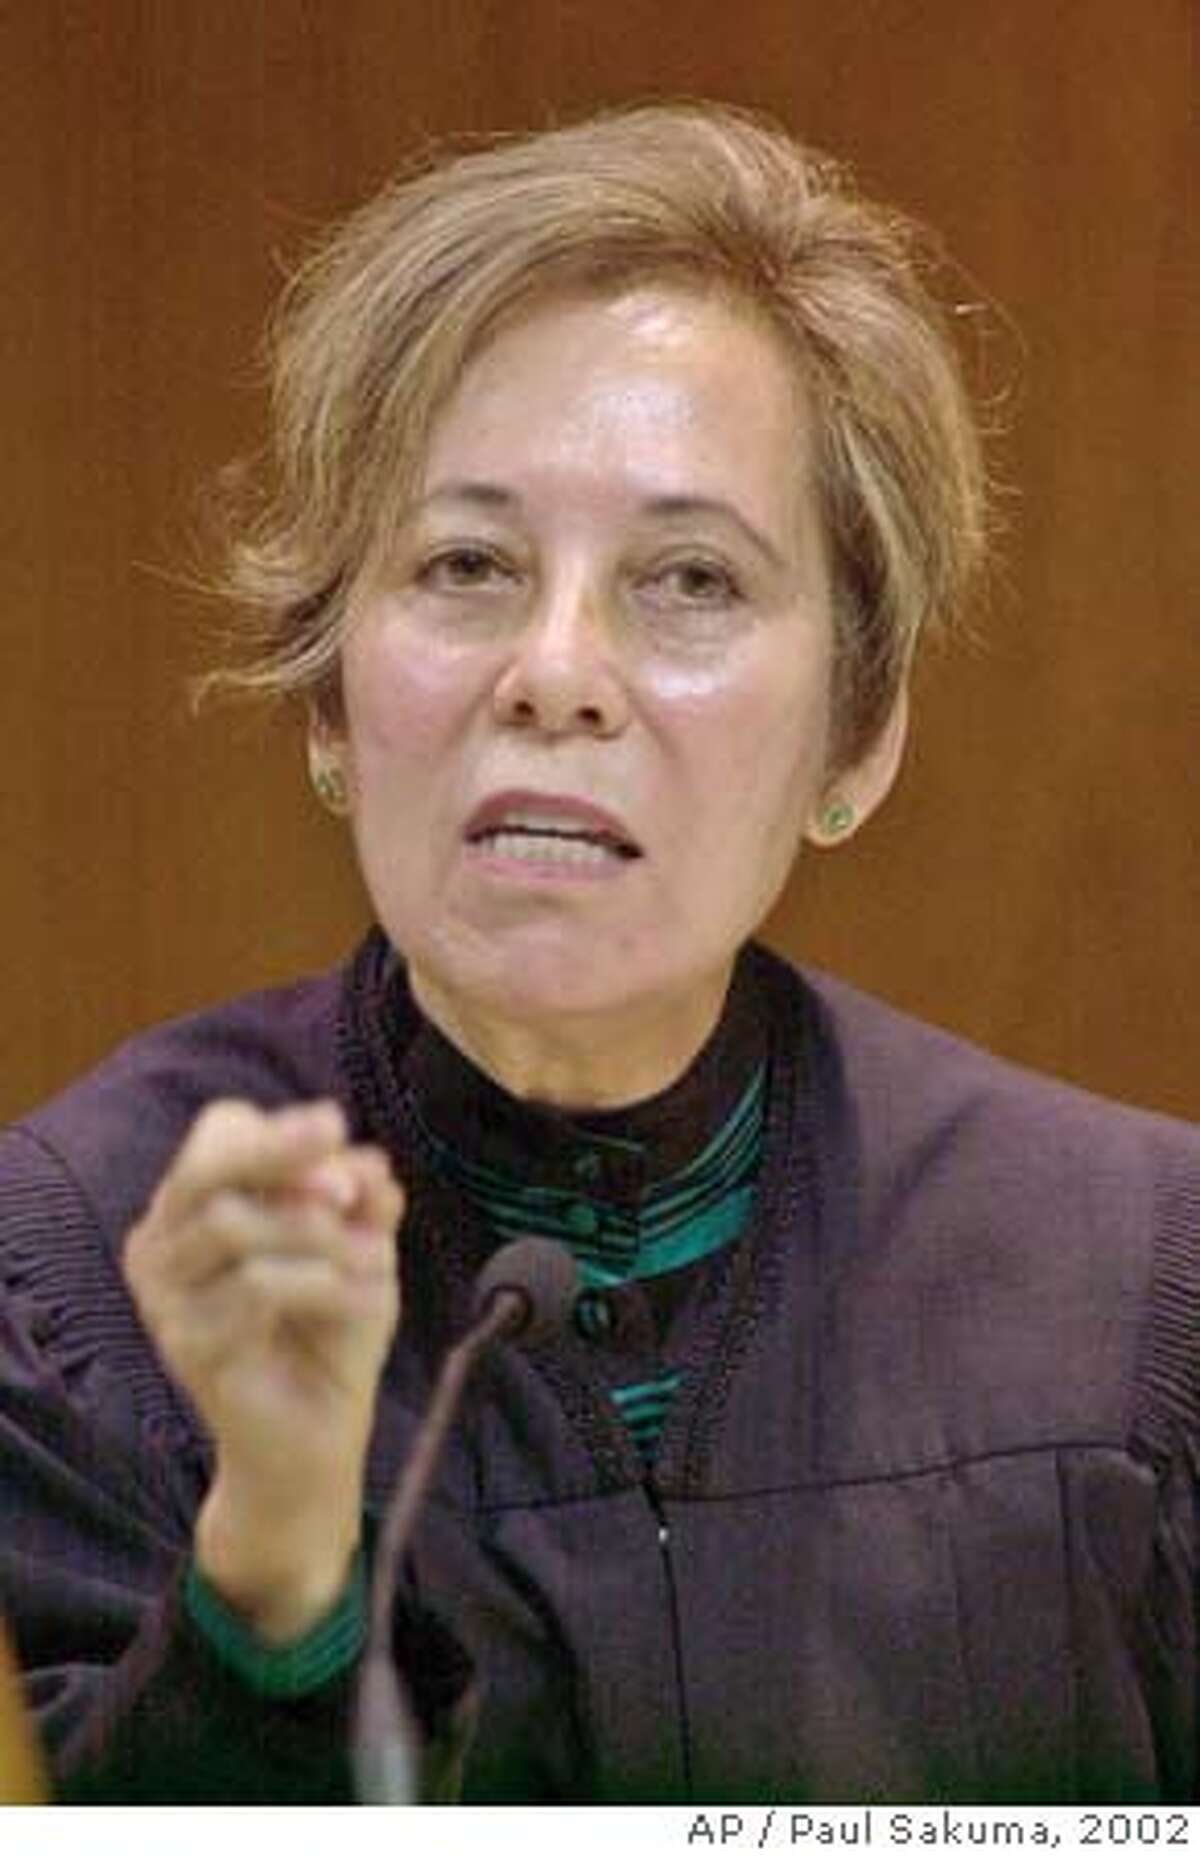 California Supreme Court Justice Joyce Kennard gestures in a courtroom in Fresno, Calif., Tuesday, Oct. 8, 2002. The court begins considering whether the governor has absolute power to overturn the Board of Prison Terms position to parole convicted murderers. (AP Photo/Paul Sakuma) ALSO RAN 8/6/2003 Justice Joyce Kennard writes of balancing the interests of the employers and employees. Theresa McGinnis waited two years before reporting the harassment. Theresa McGinnis waited two years before reporting the harassment. ProductNameChronicle ProductNameChronicle CAT